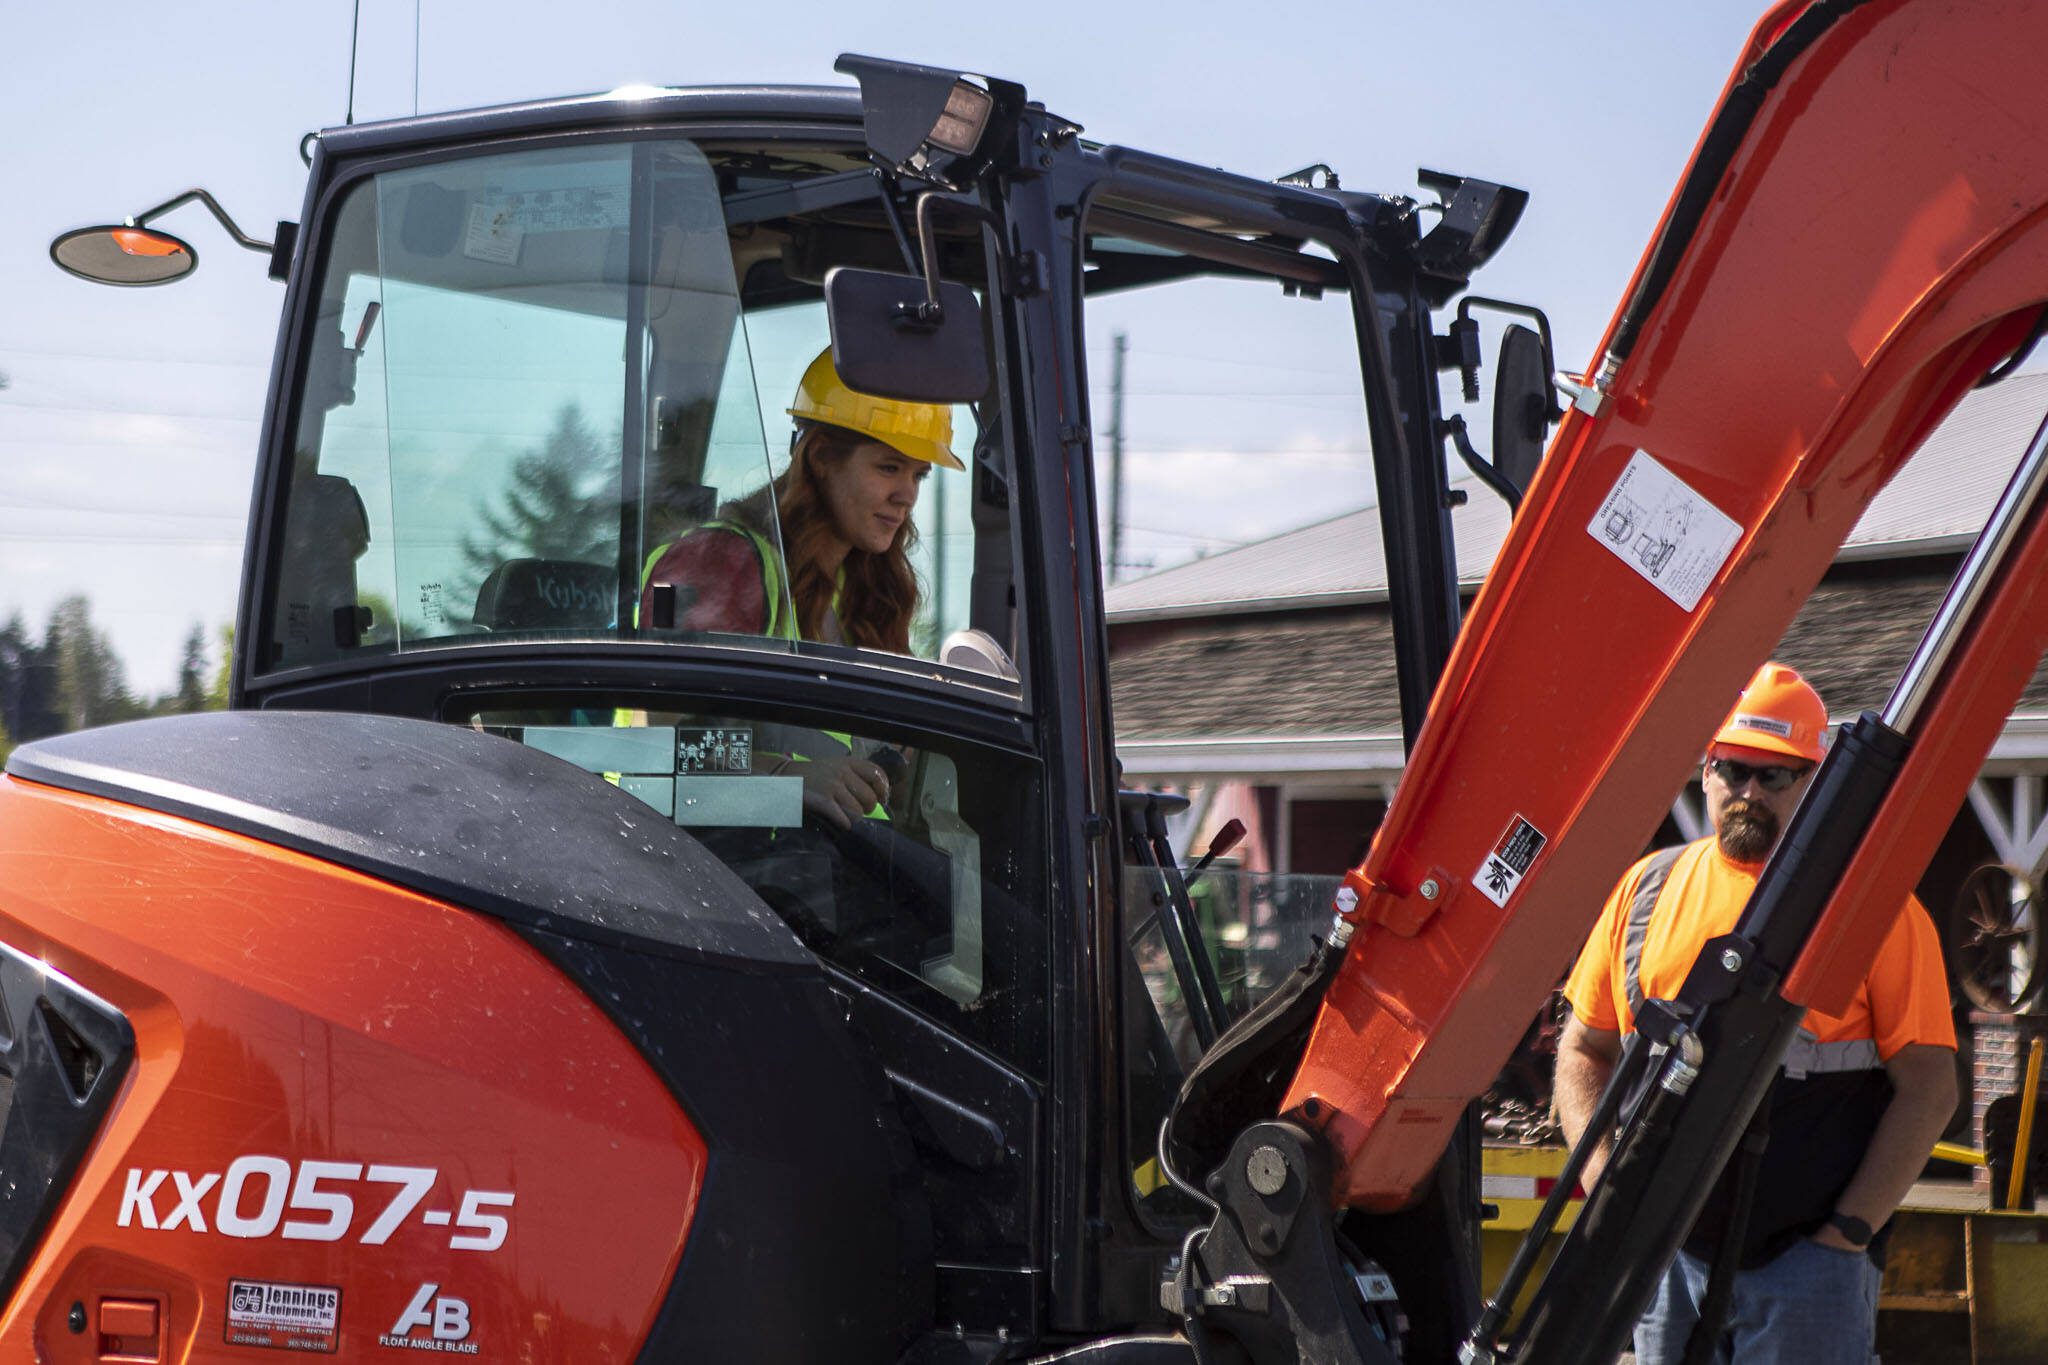 Jessica Eames, left, tries out equipment instructed by Justin Martin, right, during a trade fair at the Evergreen State Fairgrounds in Monroe, Washington on Wednesday, May 3, 2023. High school kids learned about various trades at the event. (Annie Barker / The Herald)